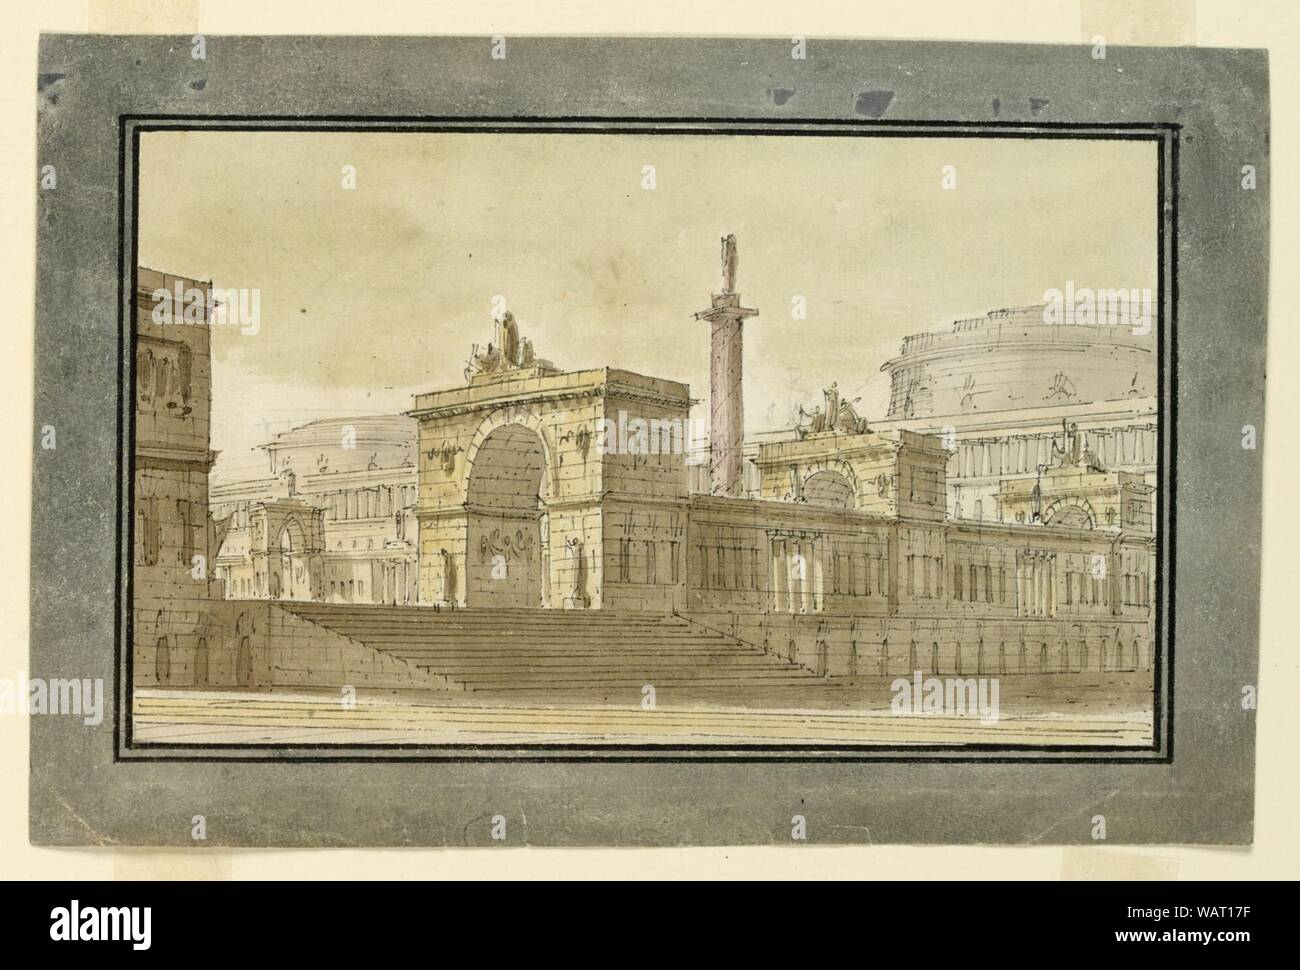 Drawing, Stage Design, Group of Palace Buildings, early 19th century ...